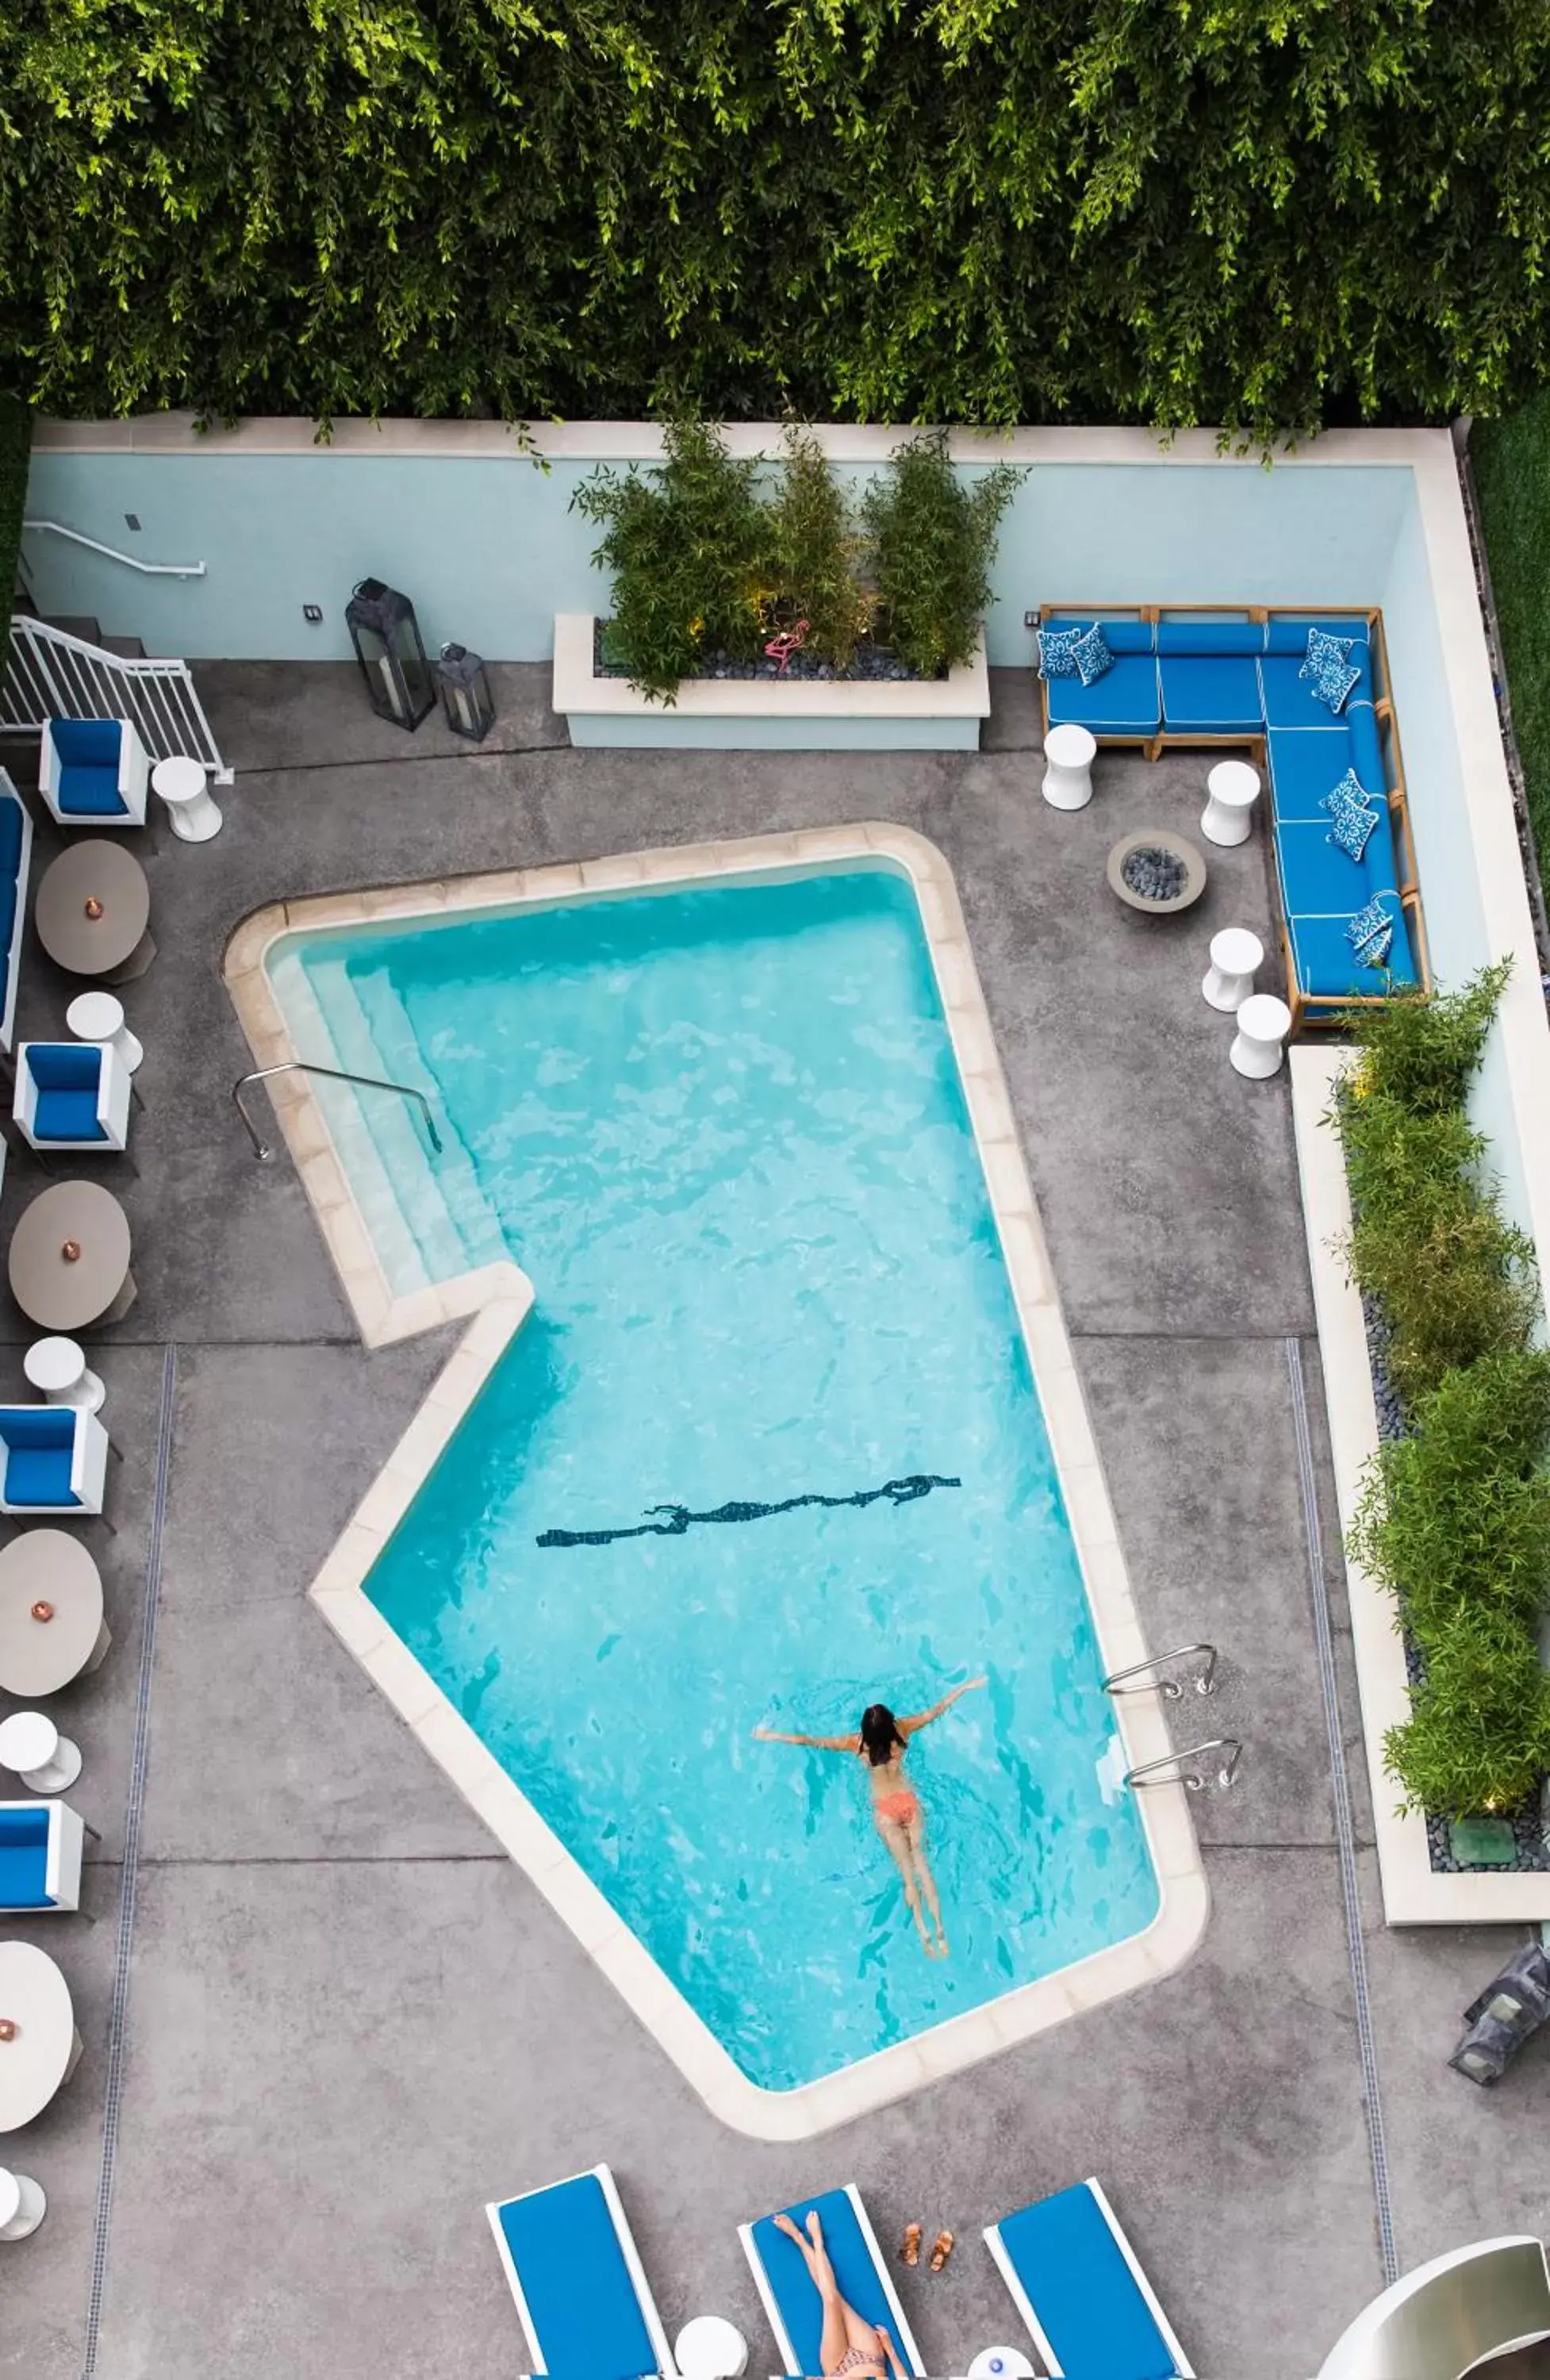 Swimming Pool in Mosaic Hotel Beverly Hills